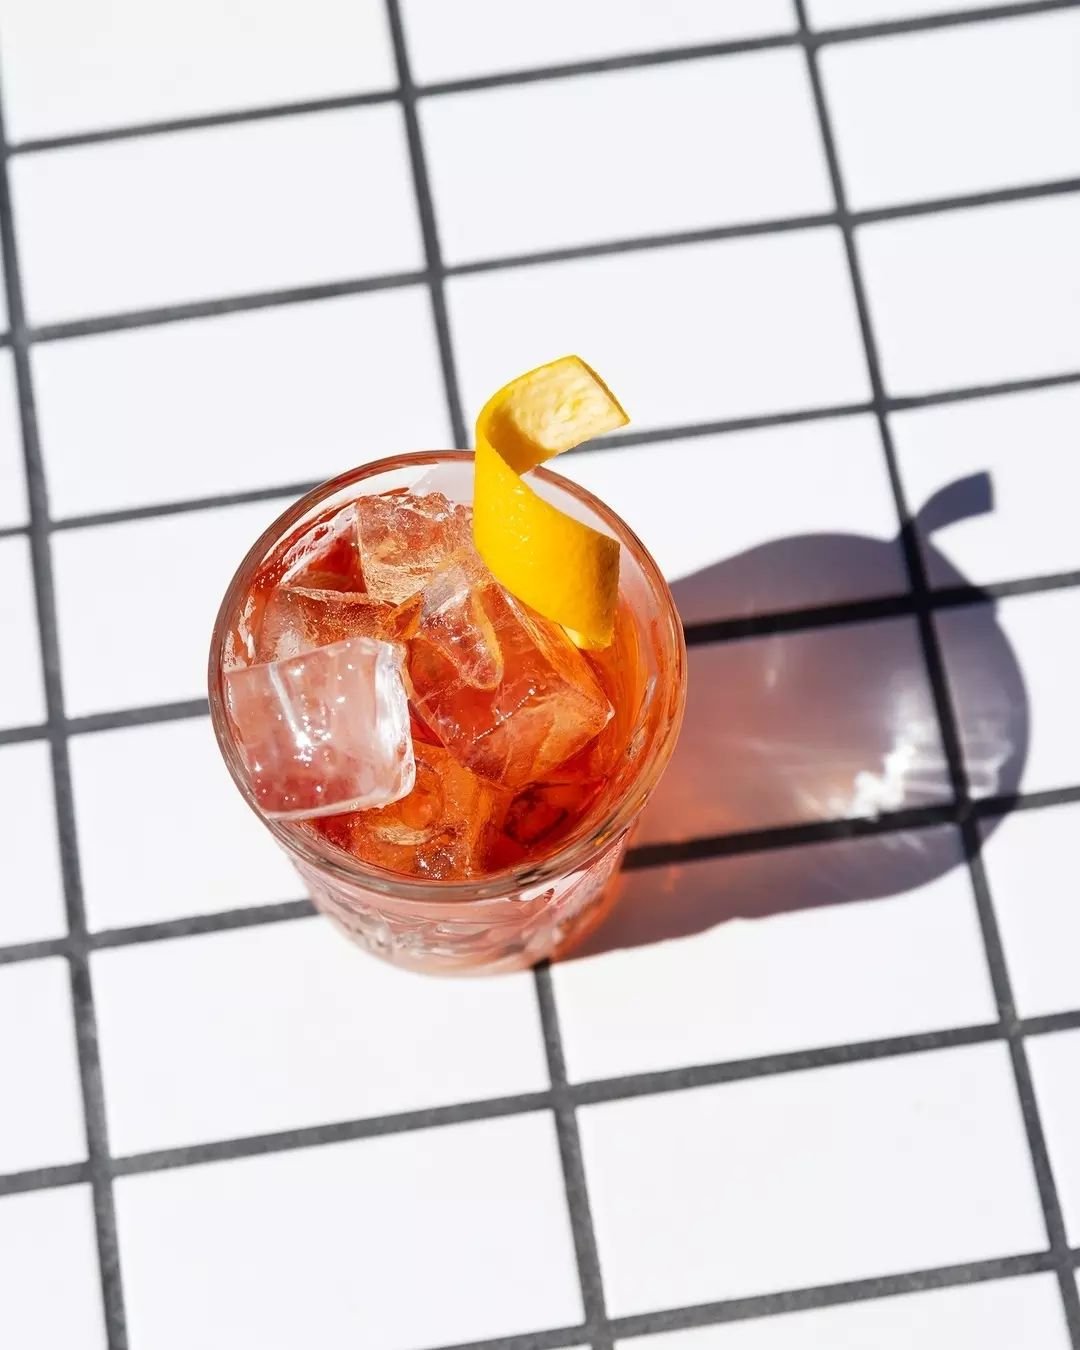 It's a long weekend. Time for a Negroni! 🍊

We're open Saturday &amp; Sunday this weekend.